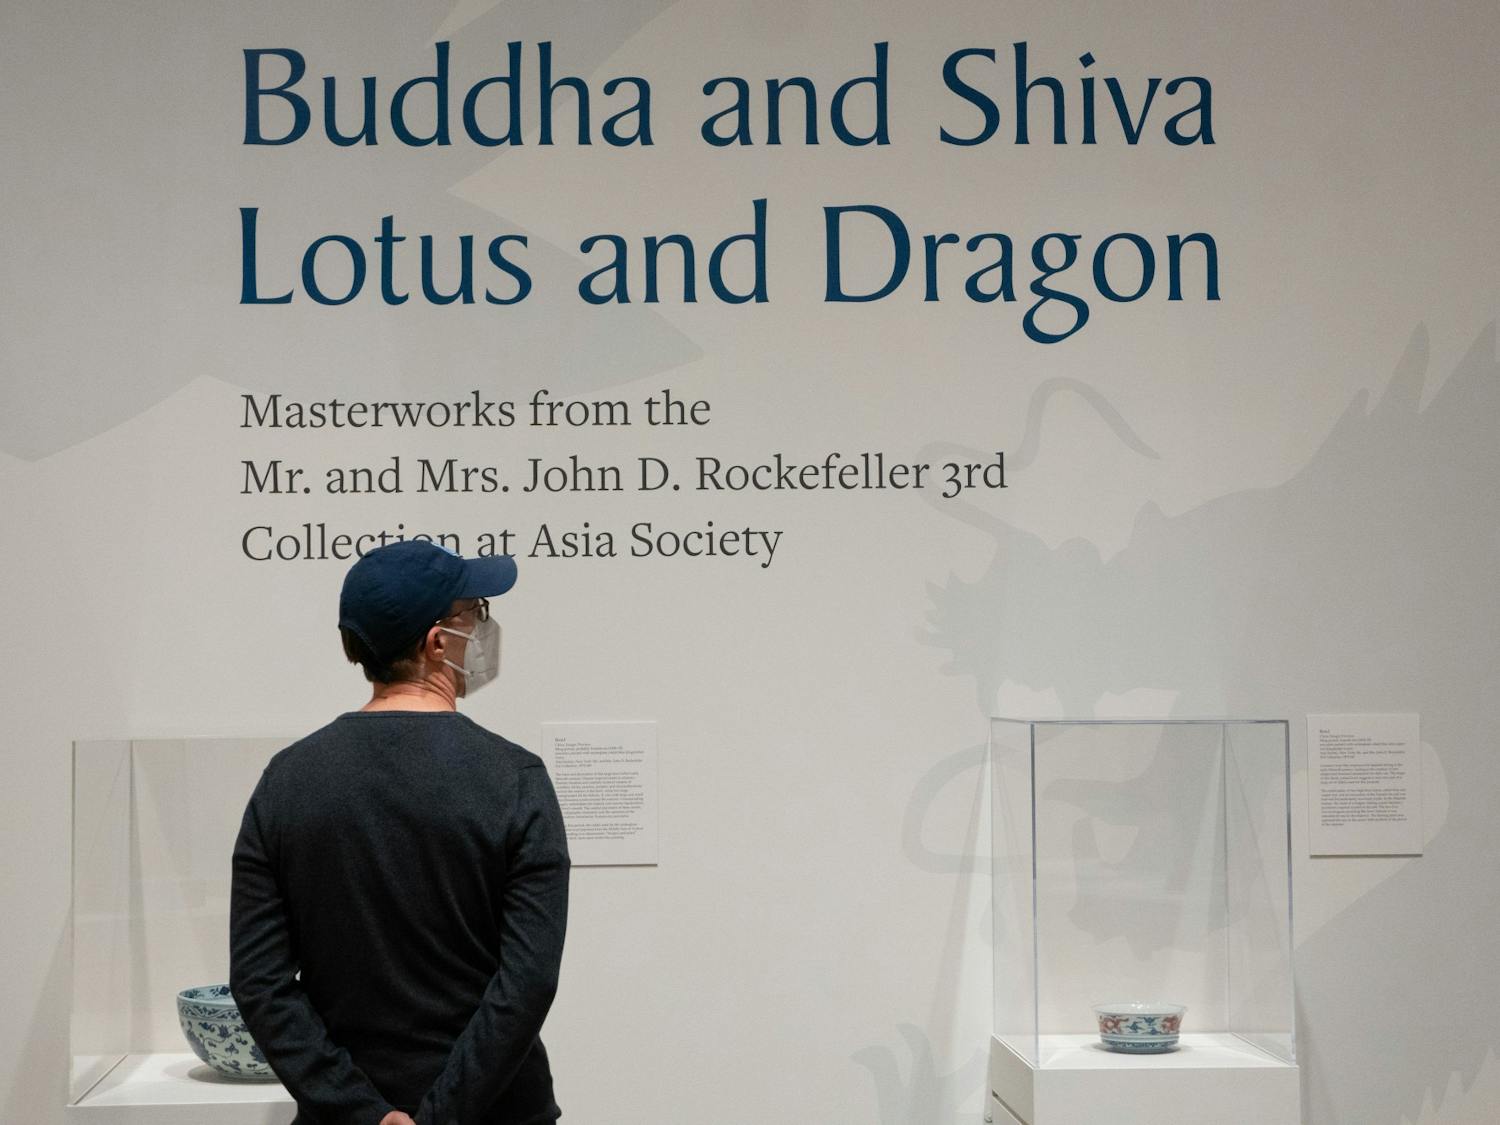 Community members visit the Ackland Art Museum for the Buddha and Shiva, Lotus and Dragon exhibit, which runs from Oct. 8 to Jan. 9. The new exhibit features nearly seventy artistic pieces from ceramics to metalwork.